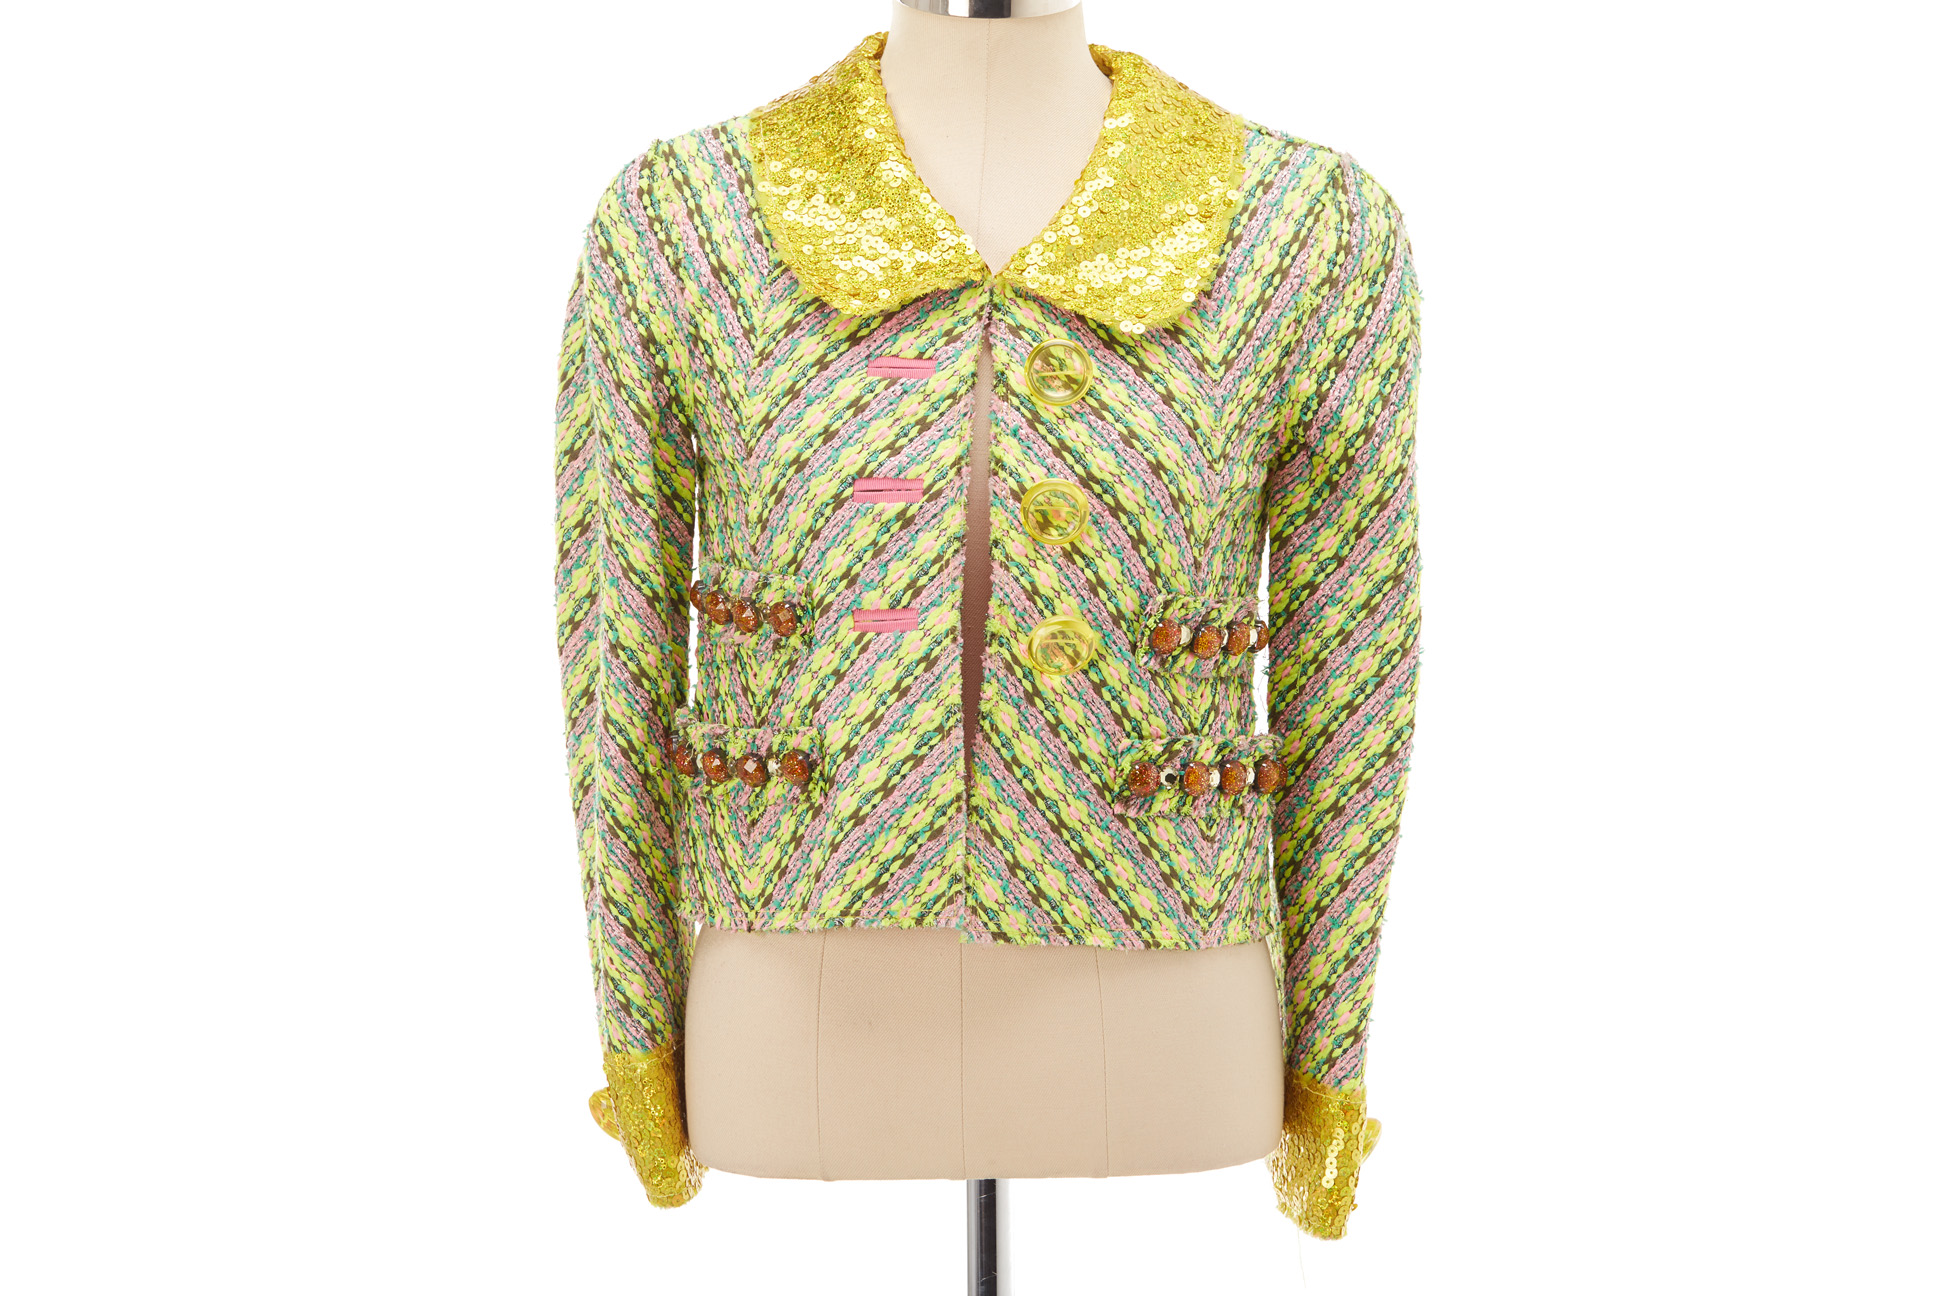 A MARC JACOBS MULTICOLOURED & YELLOW SEQUIN TWEED JACKET